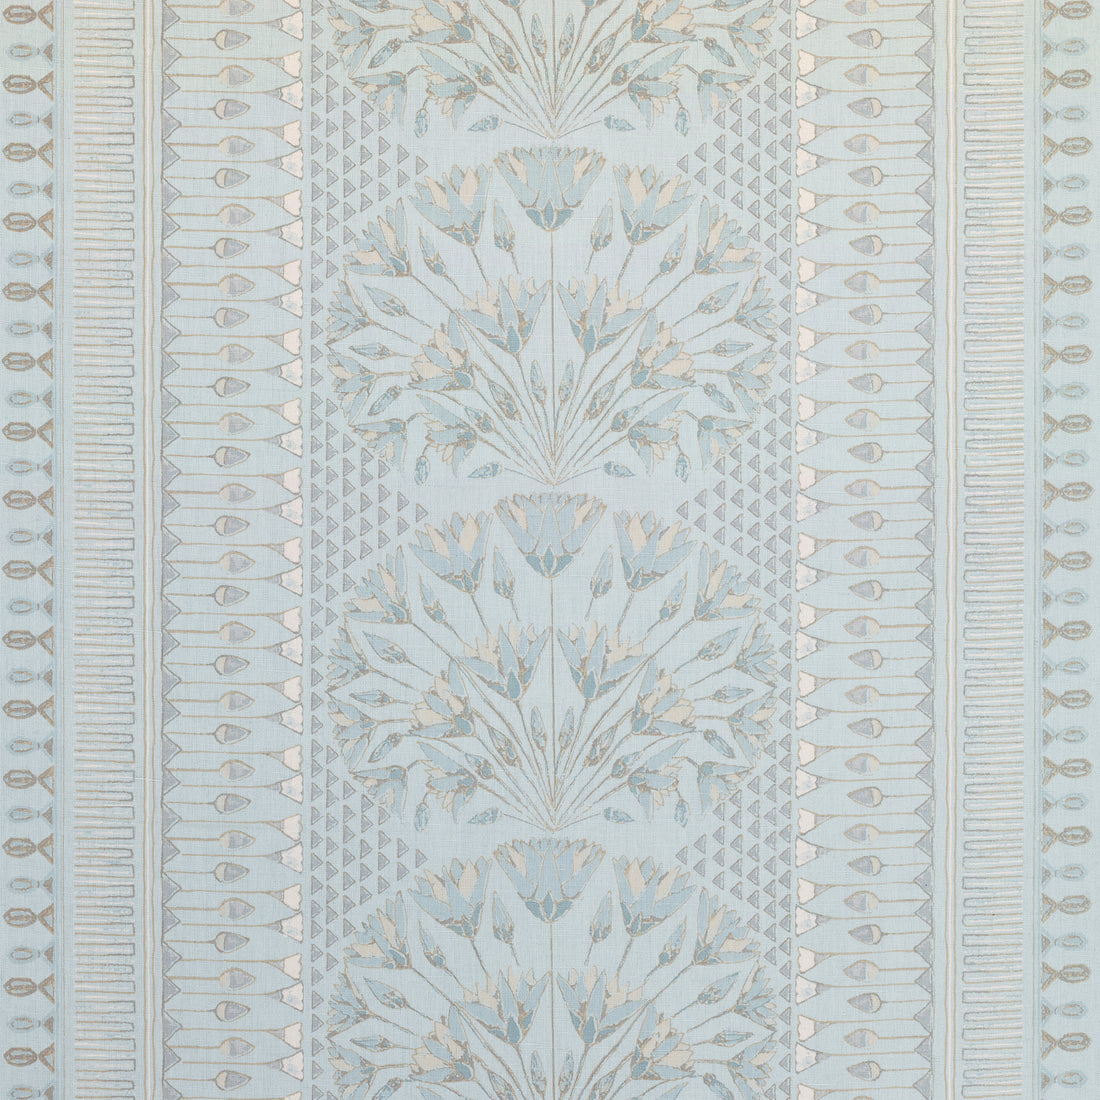 Cairo fabric in spa blue  color - pattern number AF9627 - by Anna French in the Savoy collection